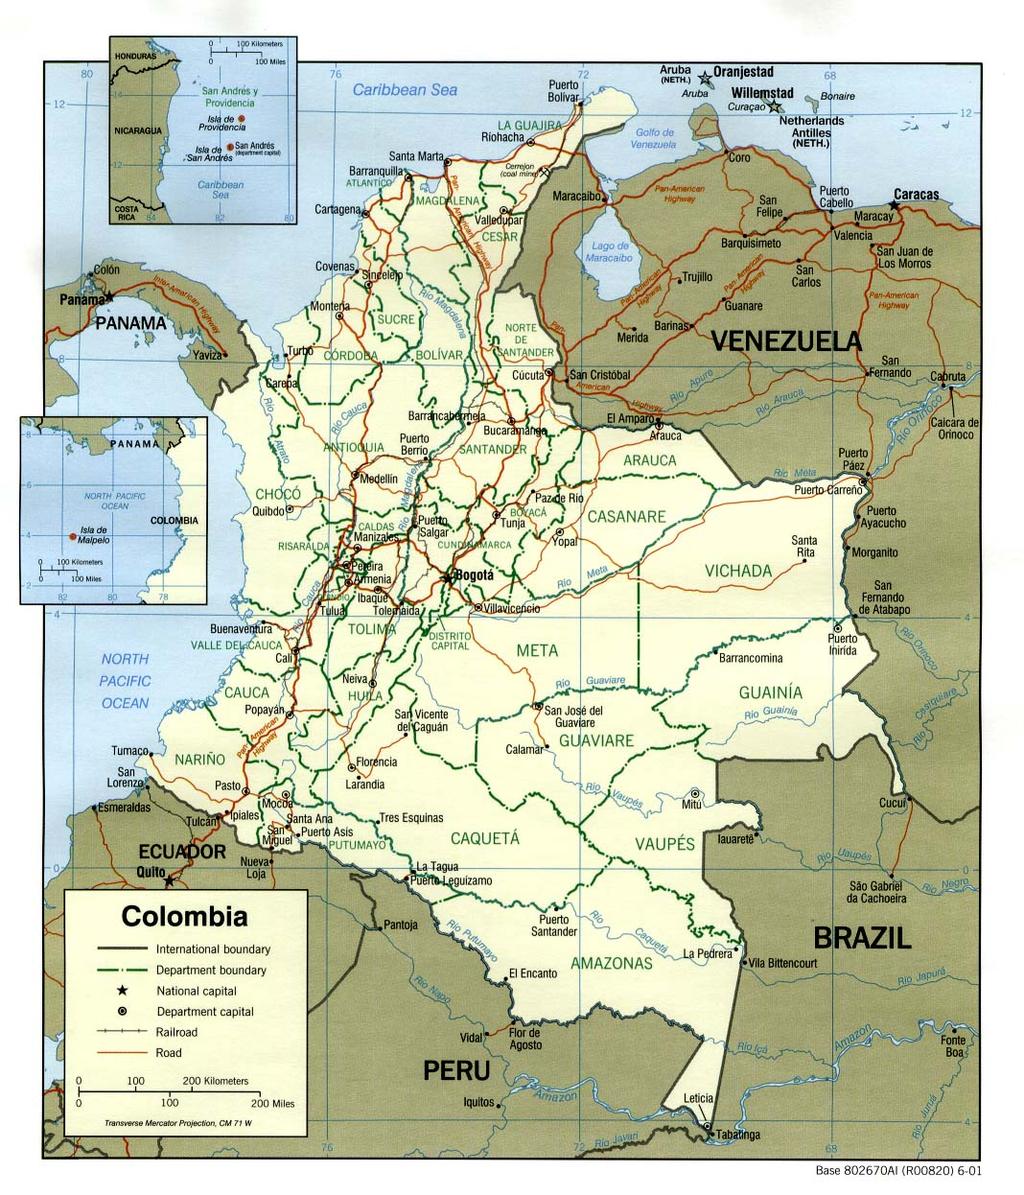 ICG Latin America Report Nº9, 23 September 2004 Page 27 APPENDIX A MAP OF